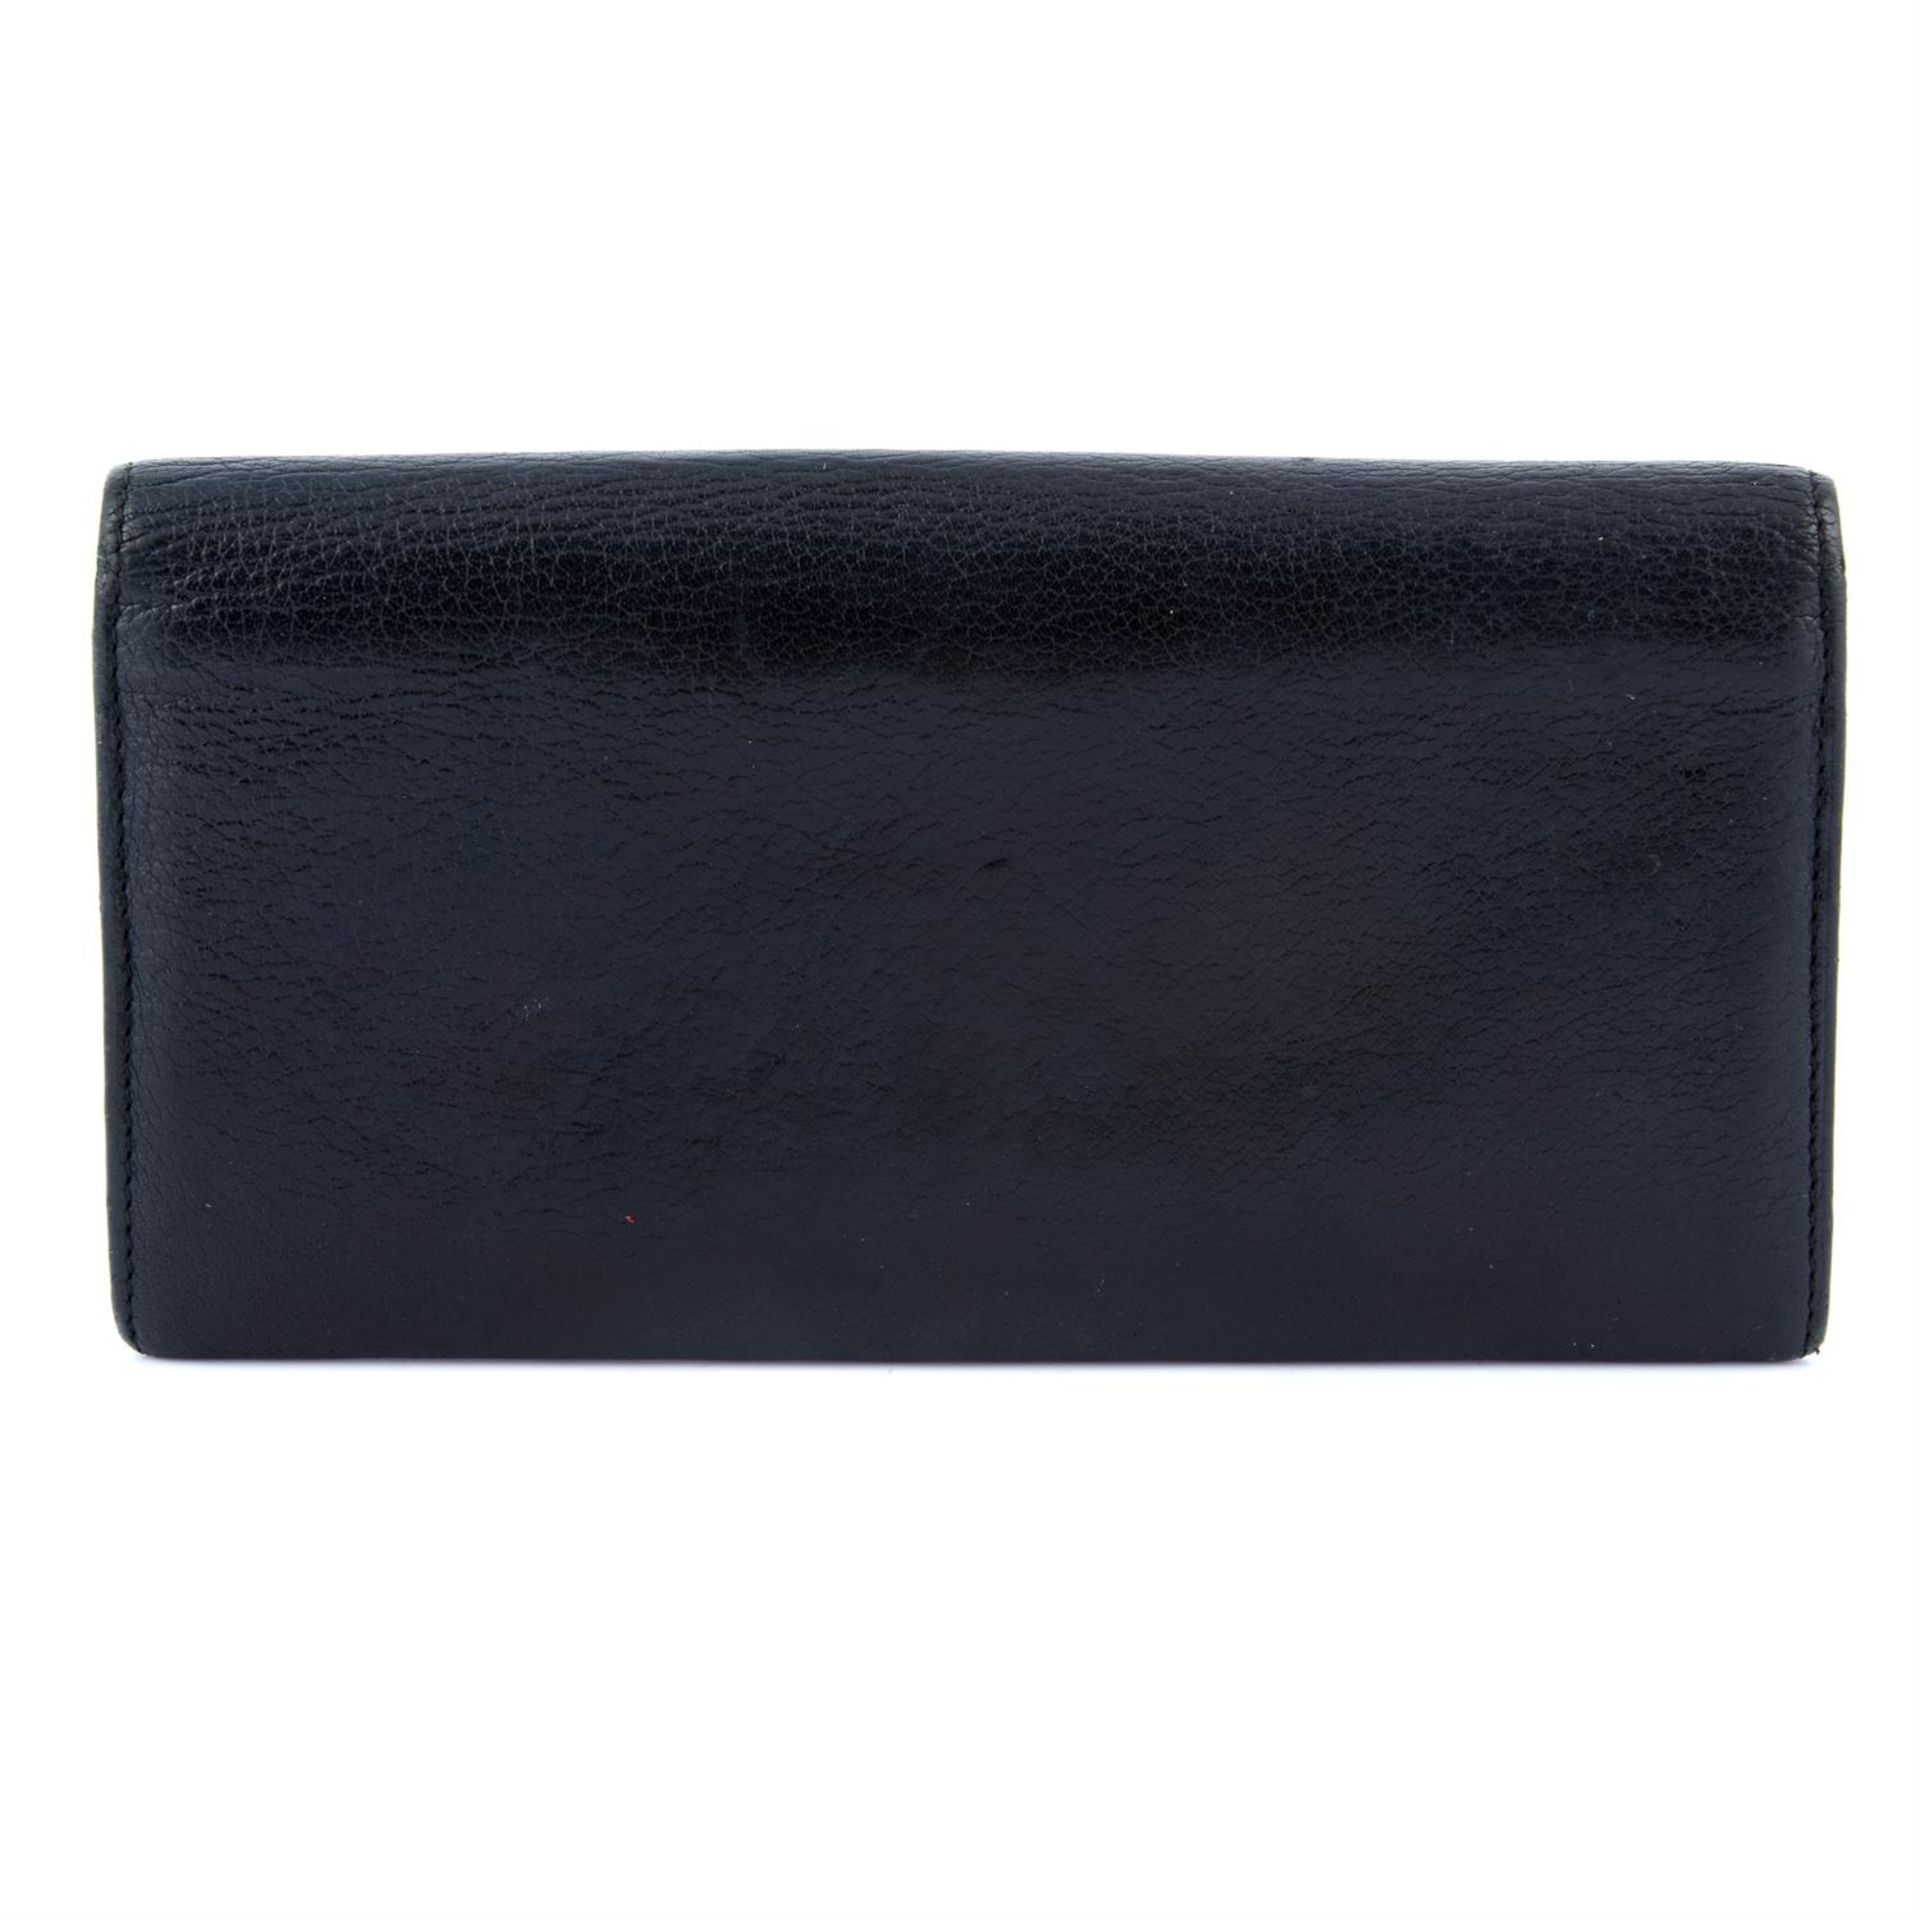 CARTIER - a black Long Bifold Wallet. - Image 2 of 3